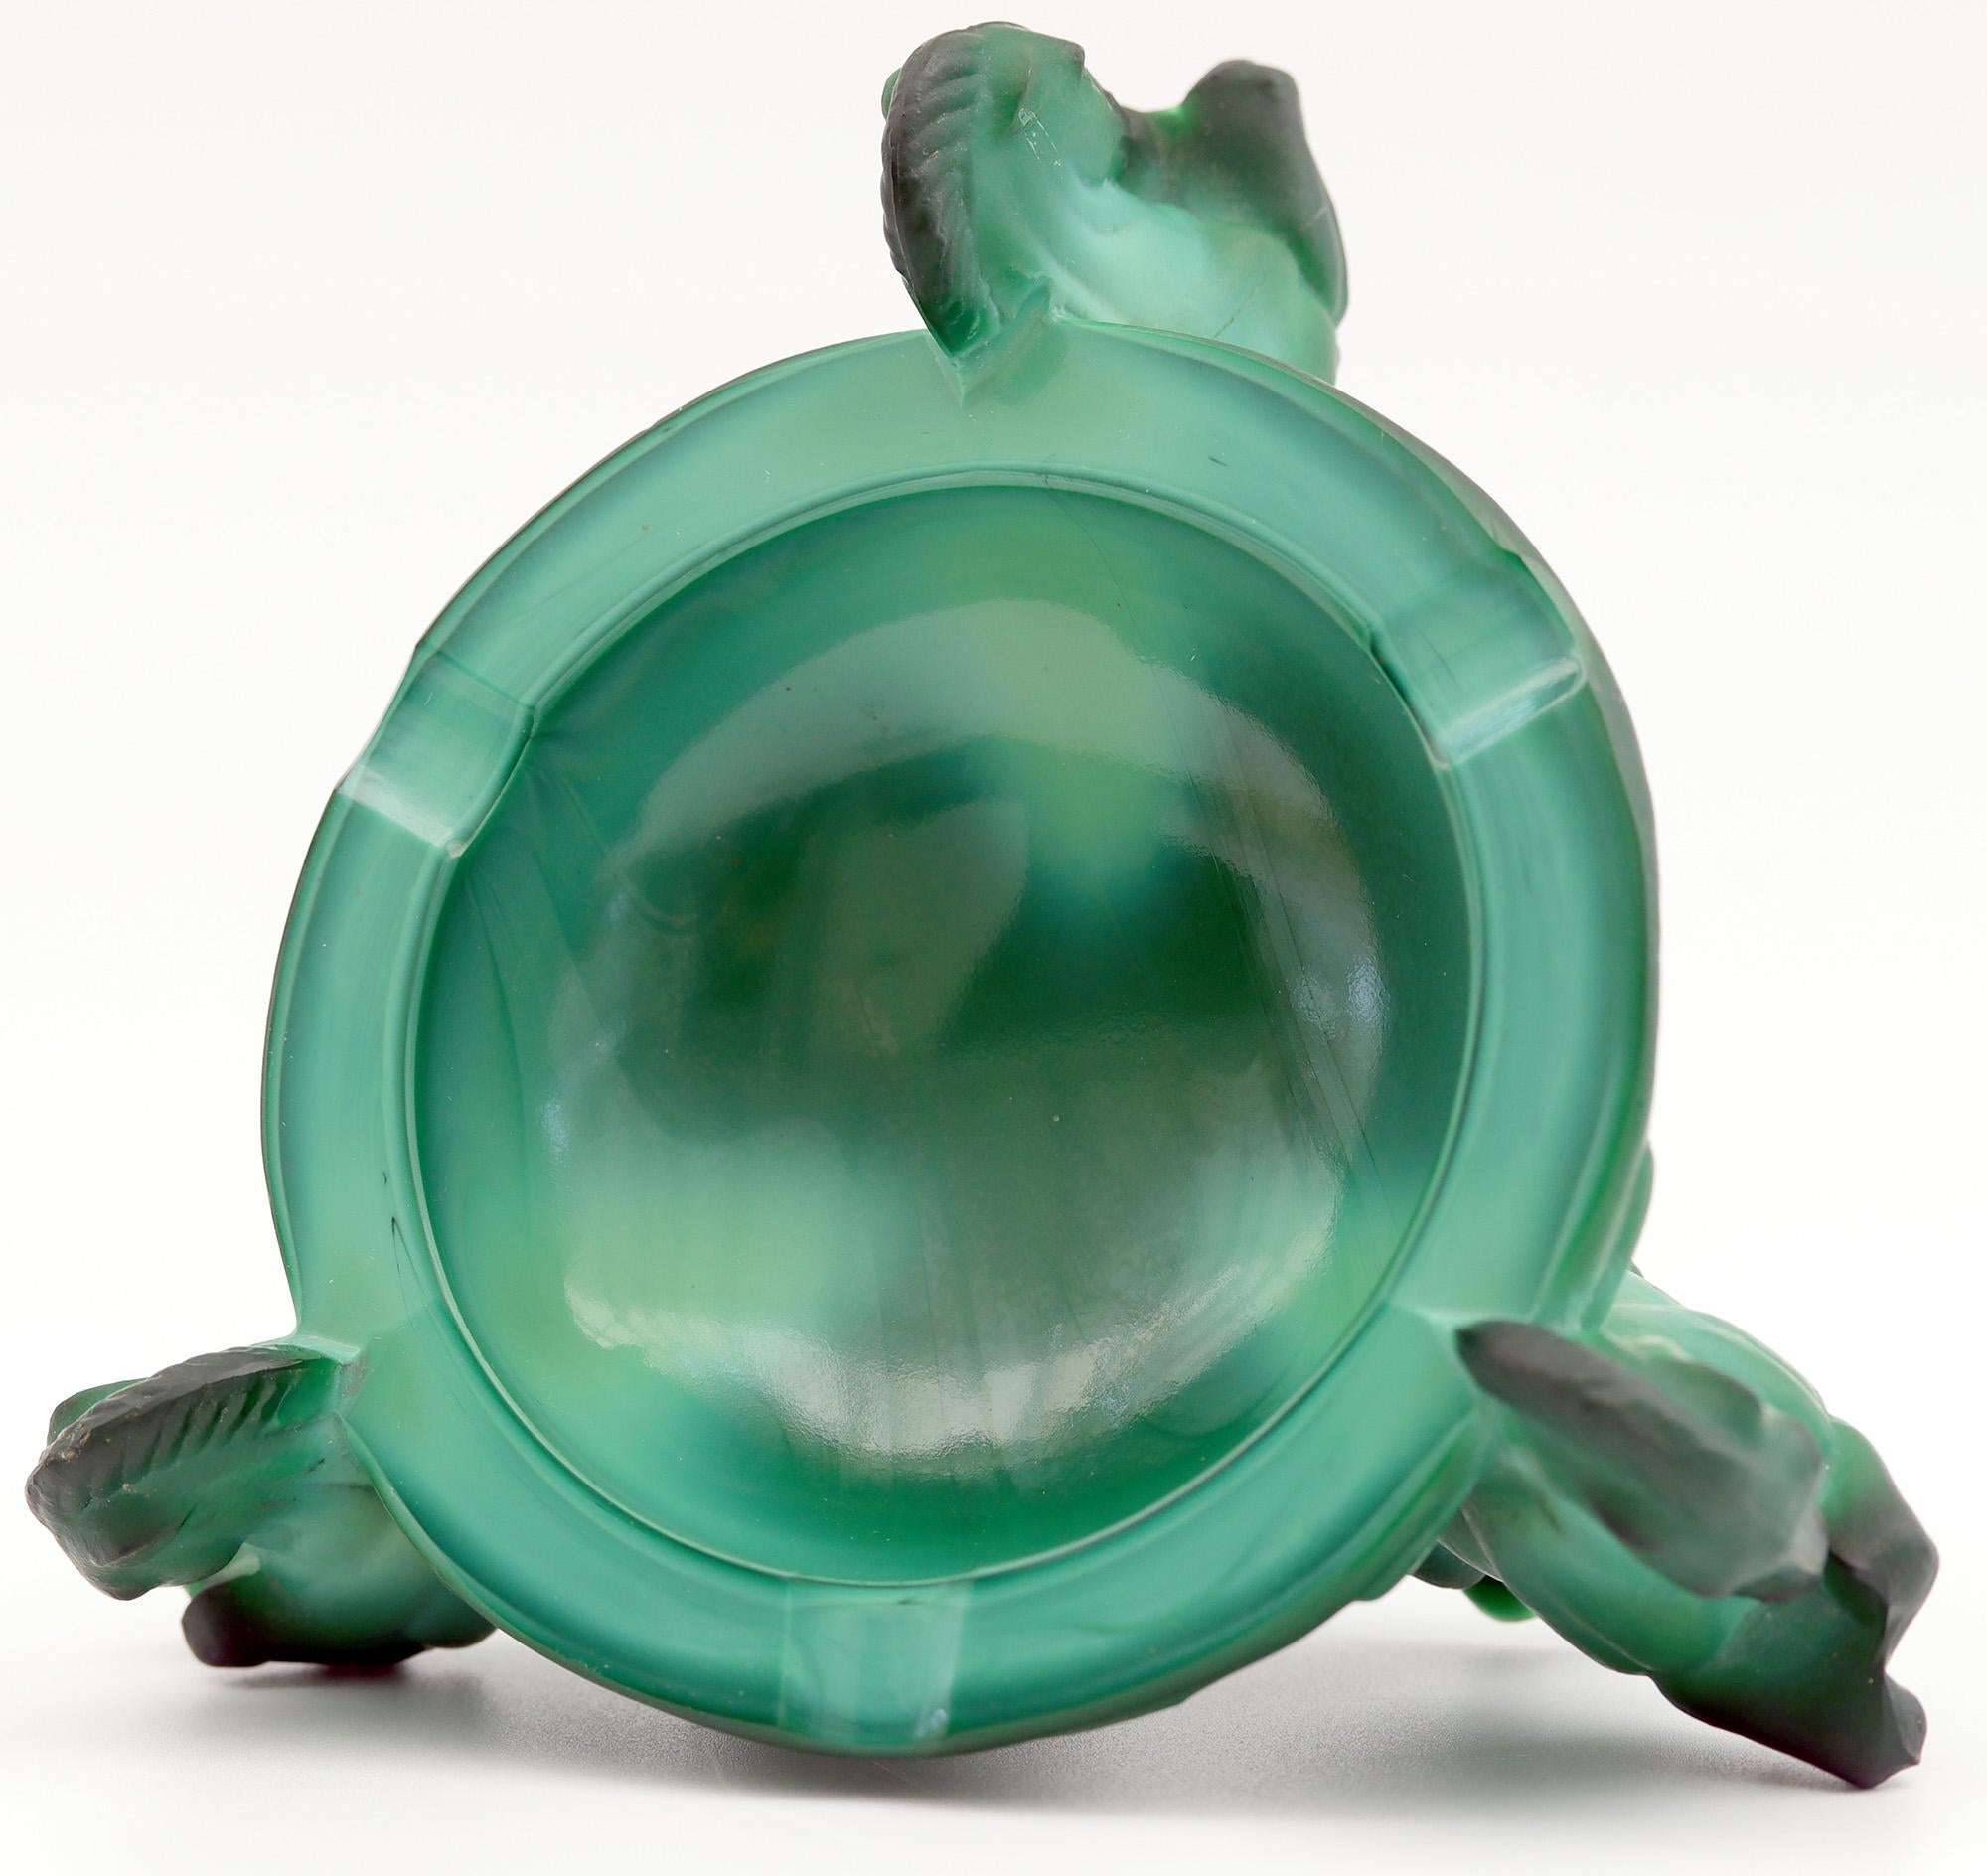 A stylish Art Deco Czech green malachite glass ashtray supported by three rearing ponies attributed to Schlevogt and dating from 1930s-1940s. The rounded ashtray has a recessed polished bowl with three polished cut out cigarette/cigar rests around